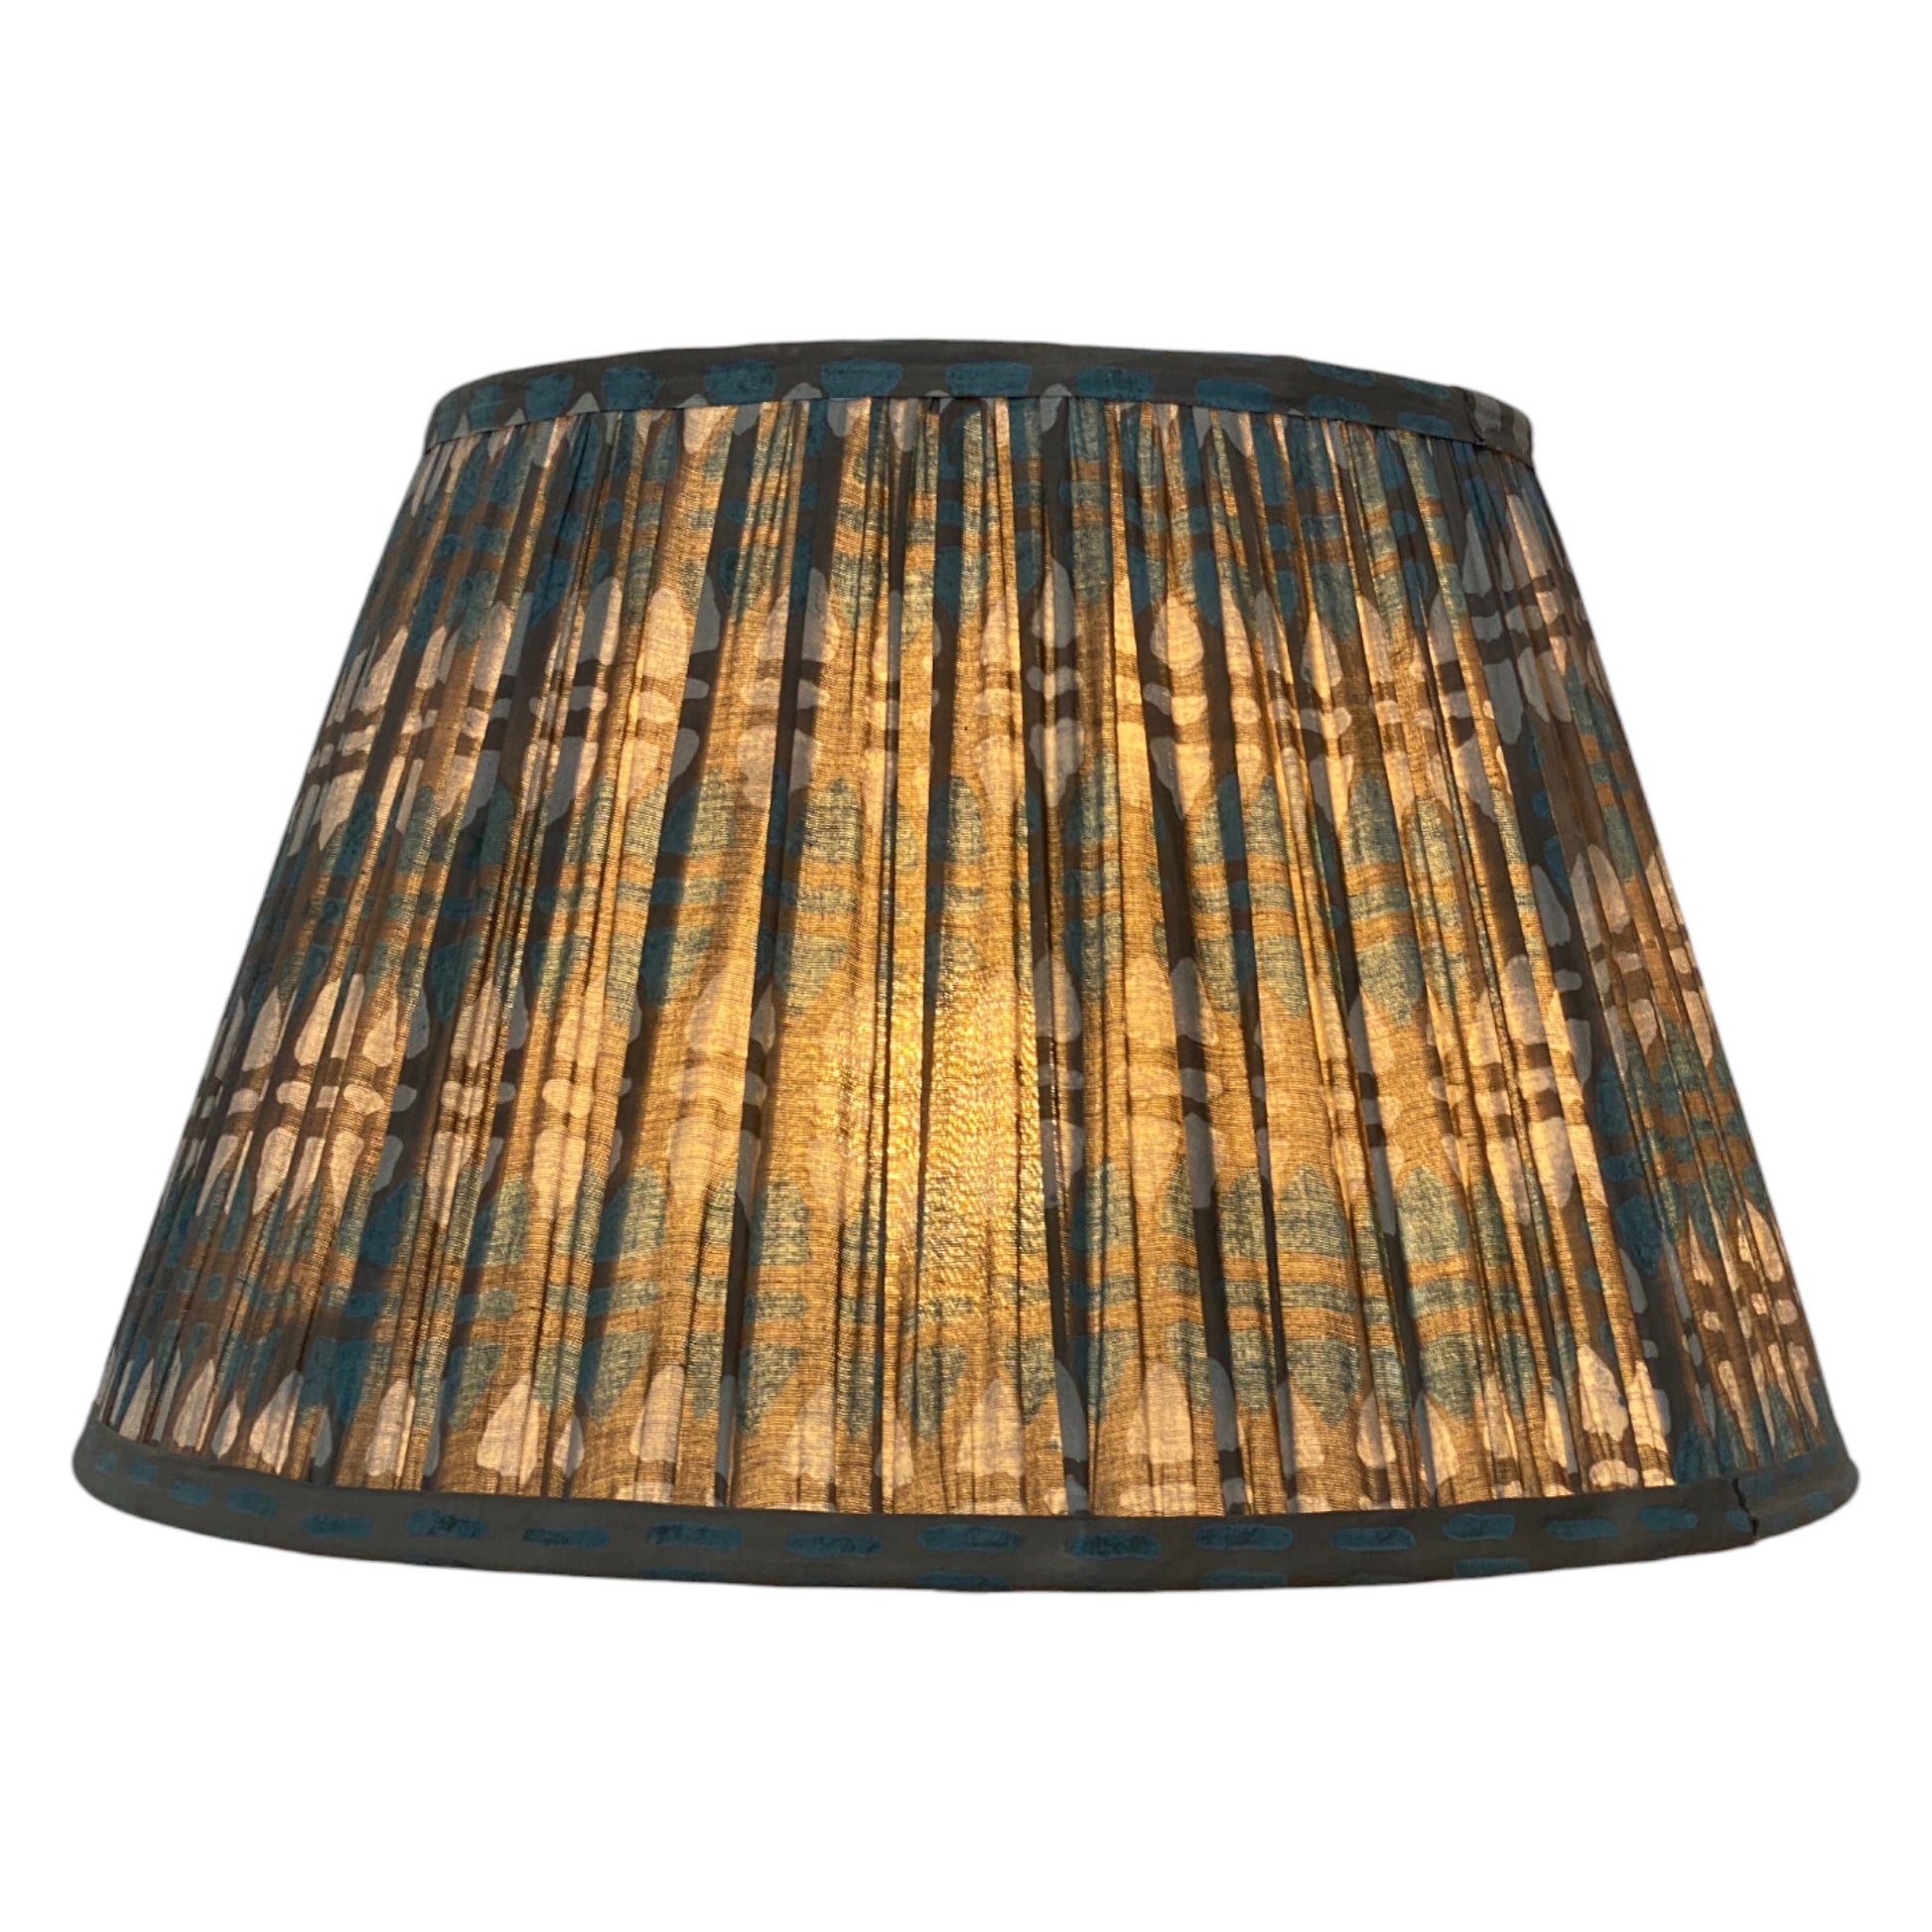 Teal and grey cotton lampshade lit